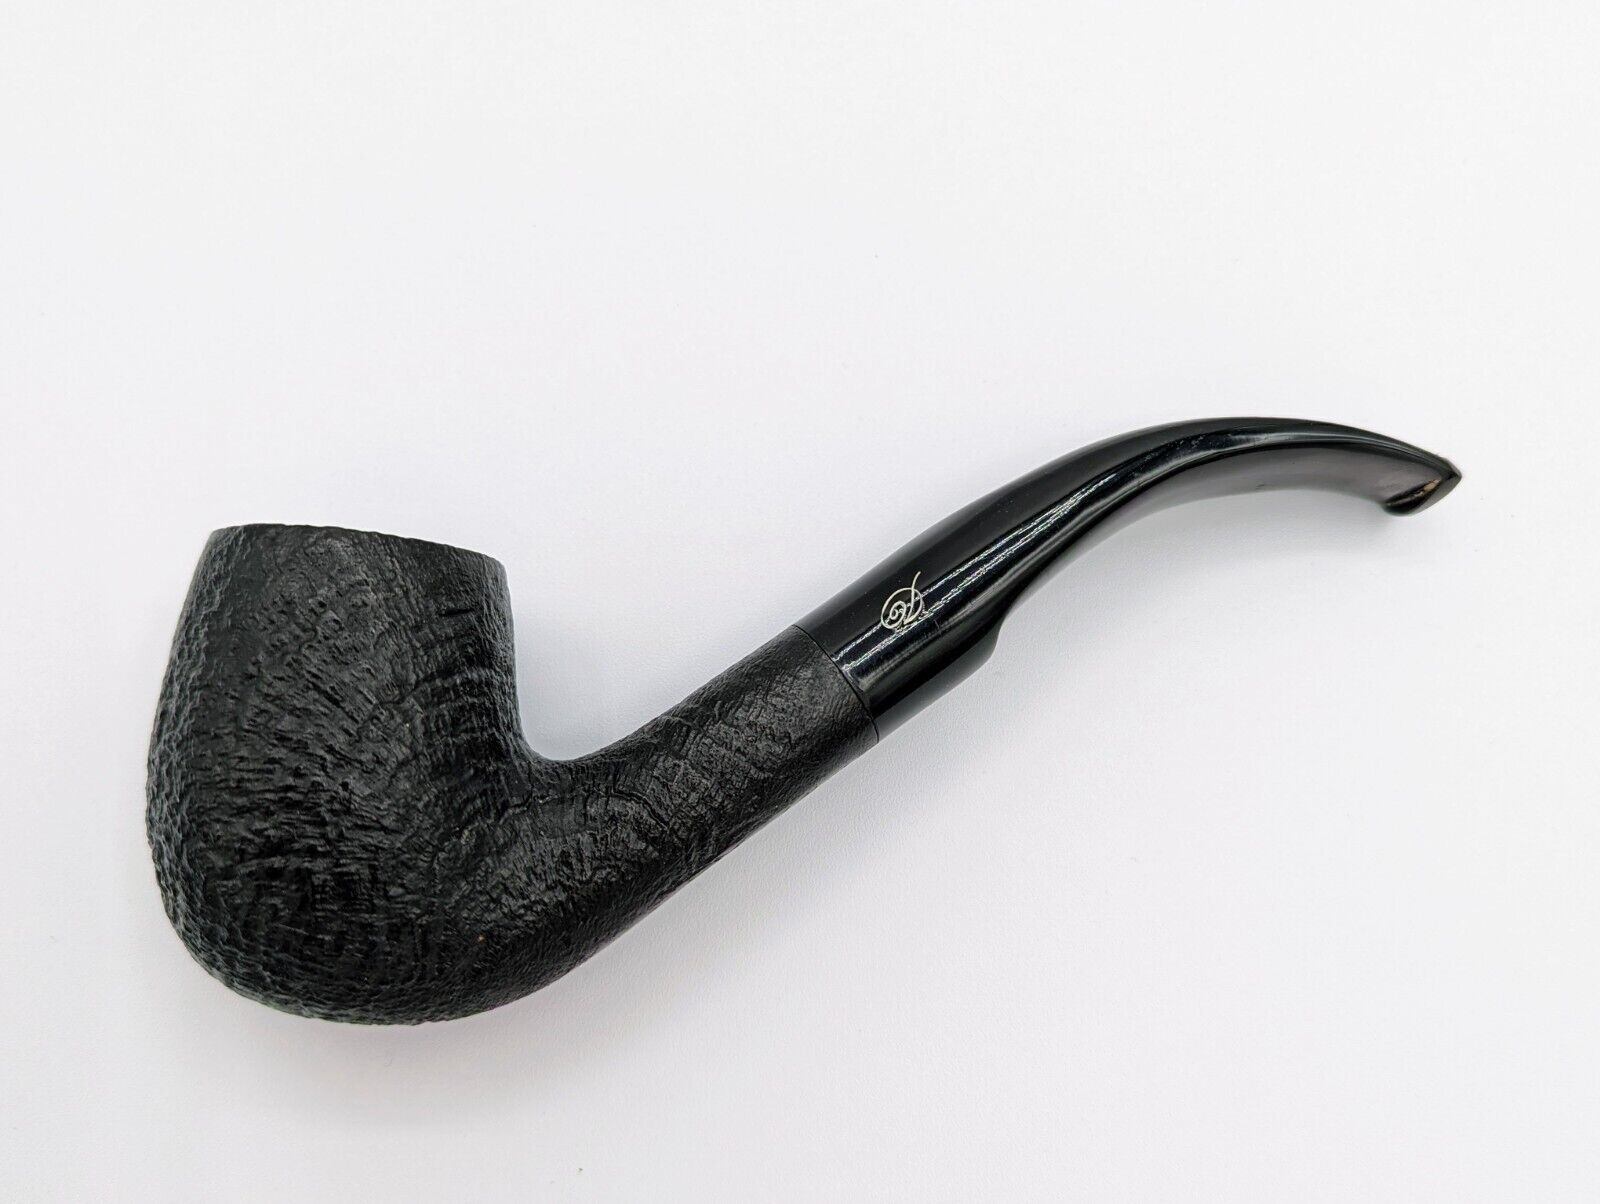 Davidoff Pot Bent Estate Hand Made Pipe. Clean. Very Good Condition.